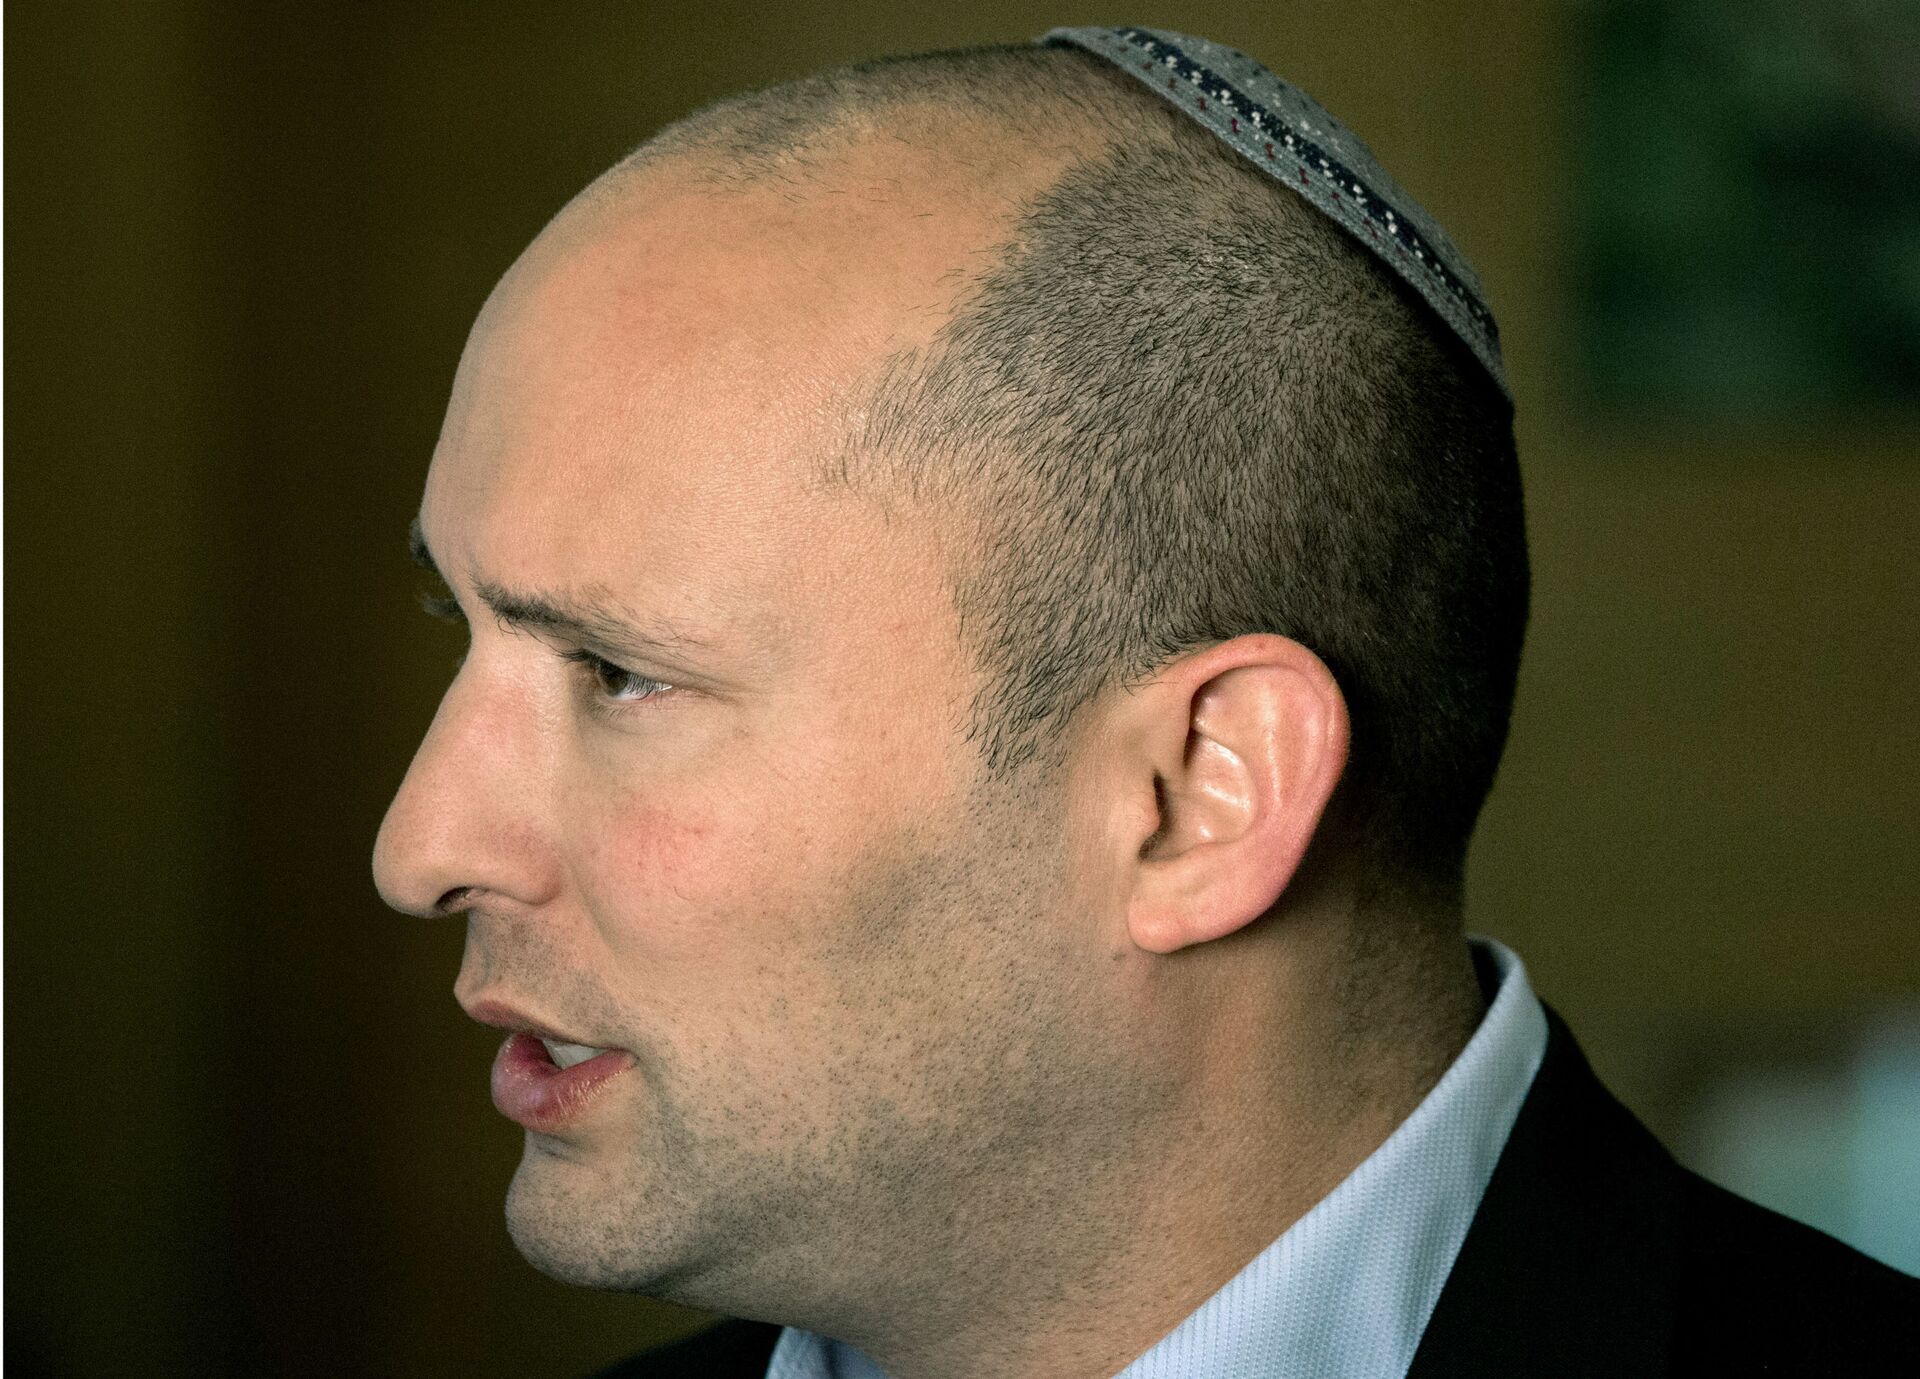  In this Monday, Feb. 16, 2015 file photo, Naftali Bennett, leader of the Jewish Home party, speaks during an interview to The Associated Press in Jerusalem. - Sputnik International, 1920, 07.09.2021